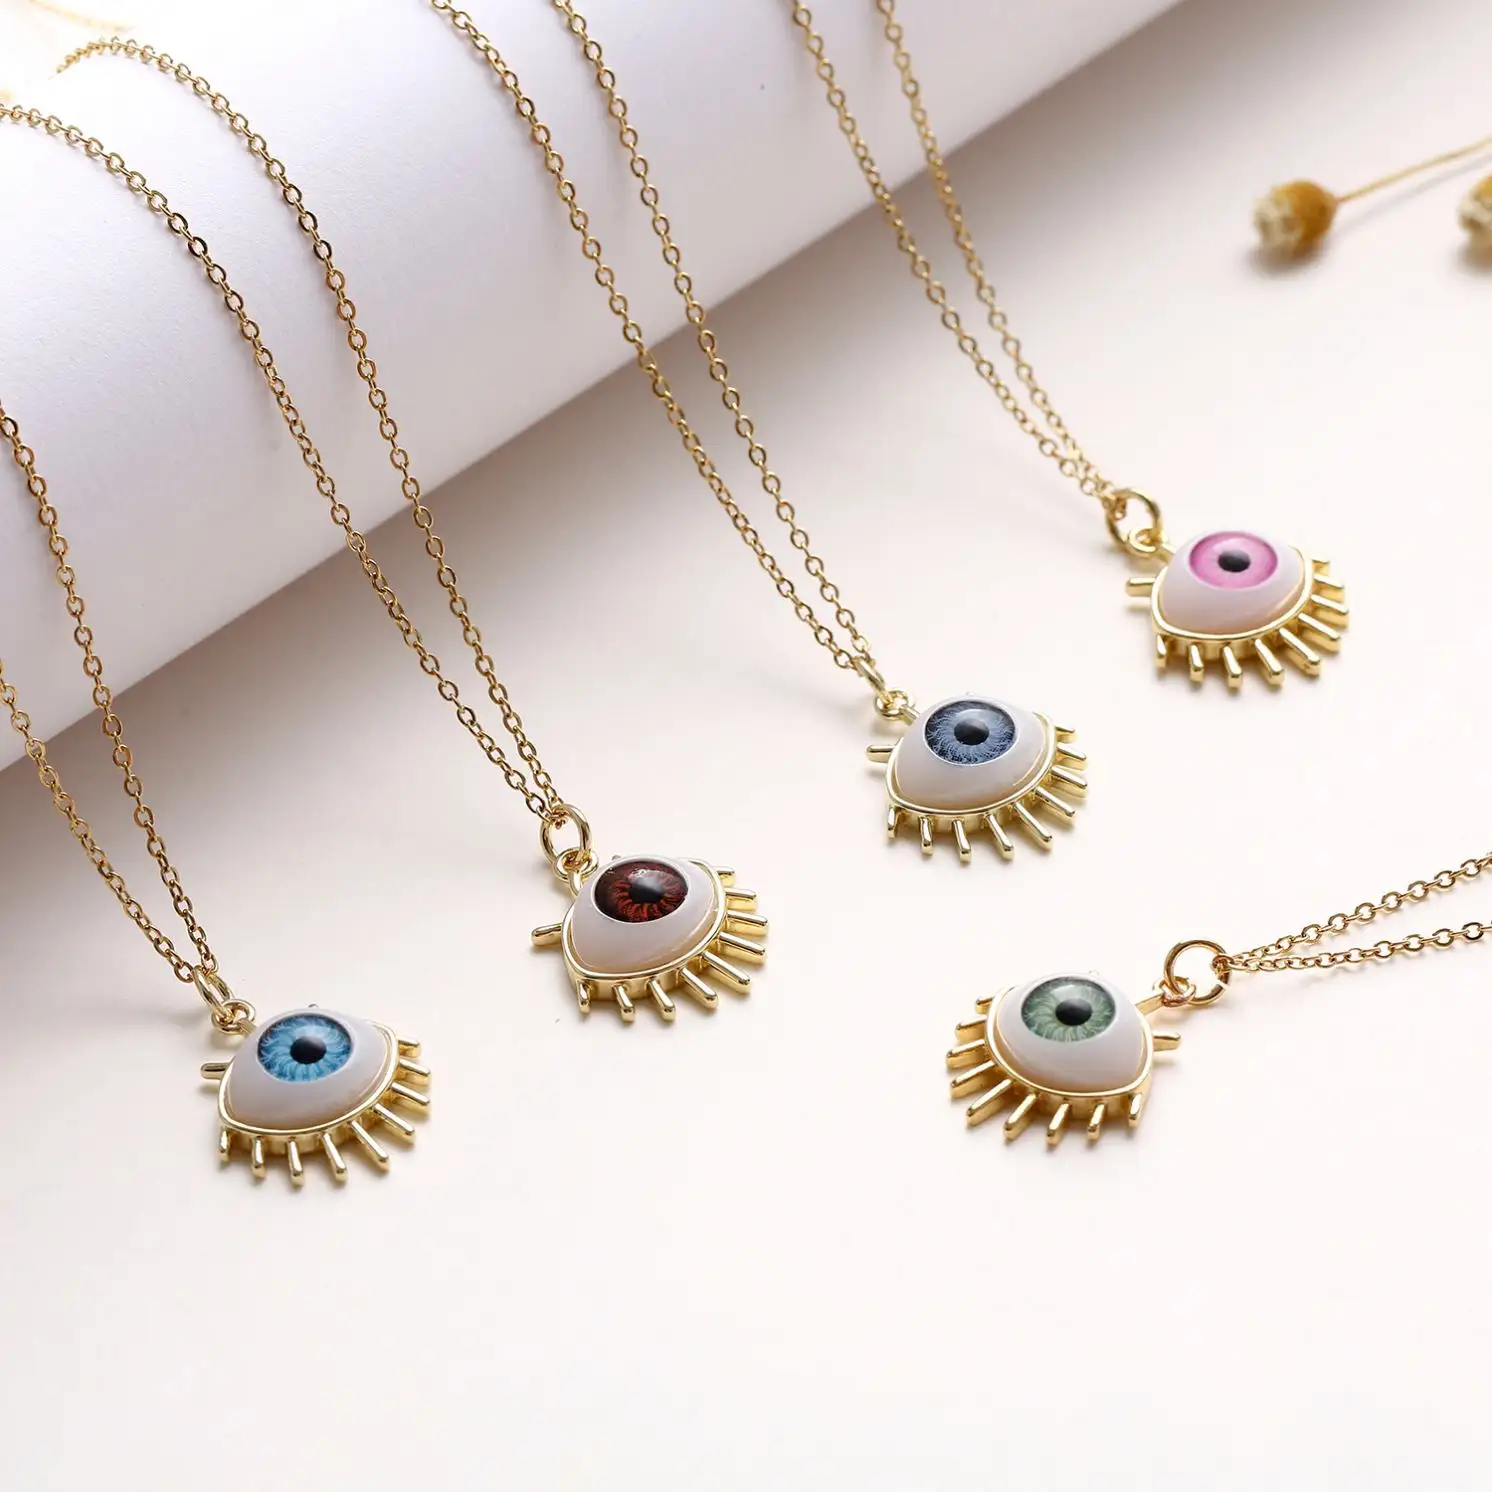 2022 Fashion Ladies Gold Variety Blue Eye Necklace Stainless Steel Mysterious Element Demon Eye Necklace Gift Wholesale